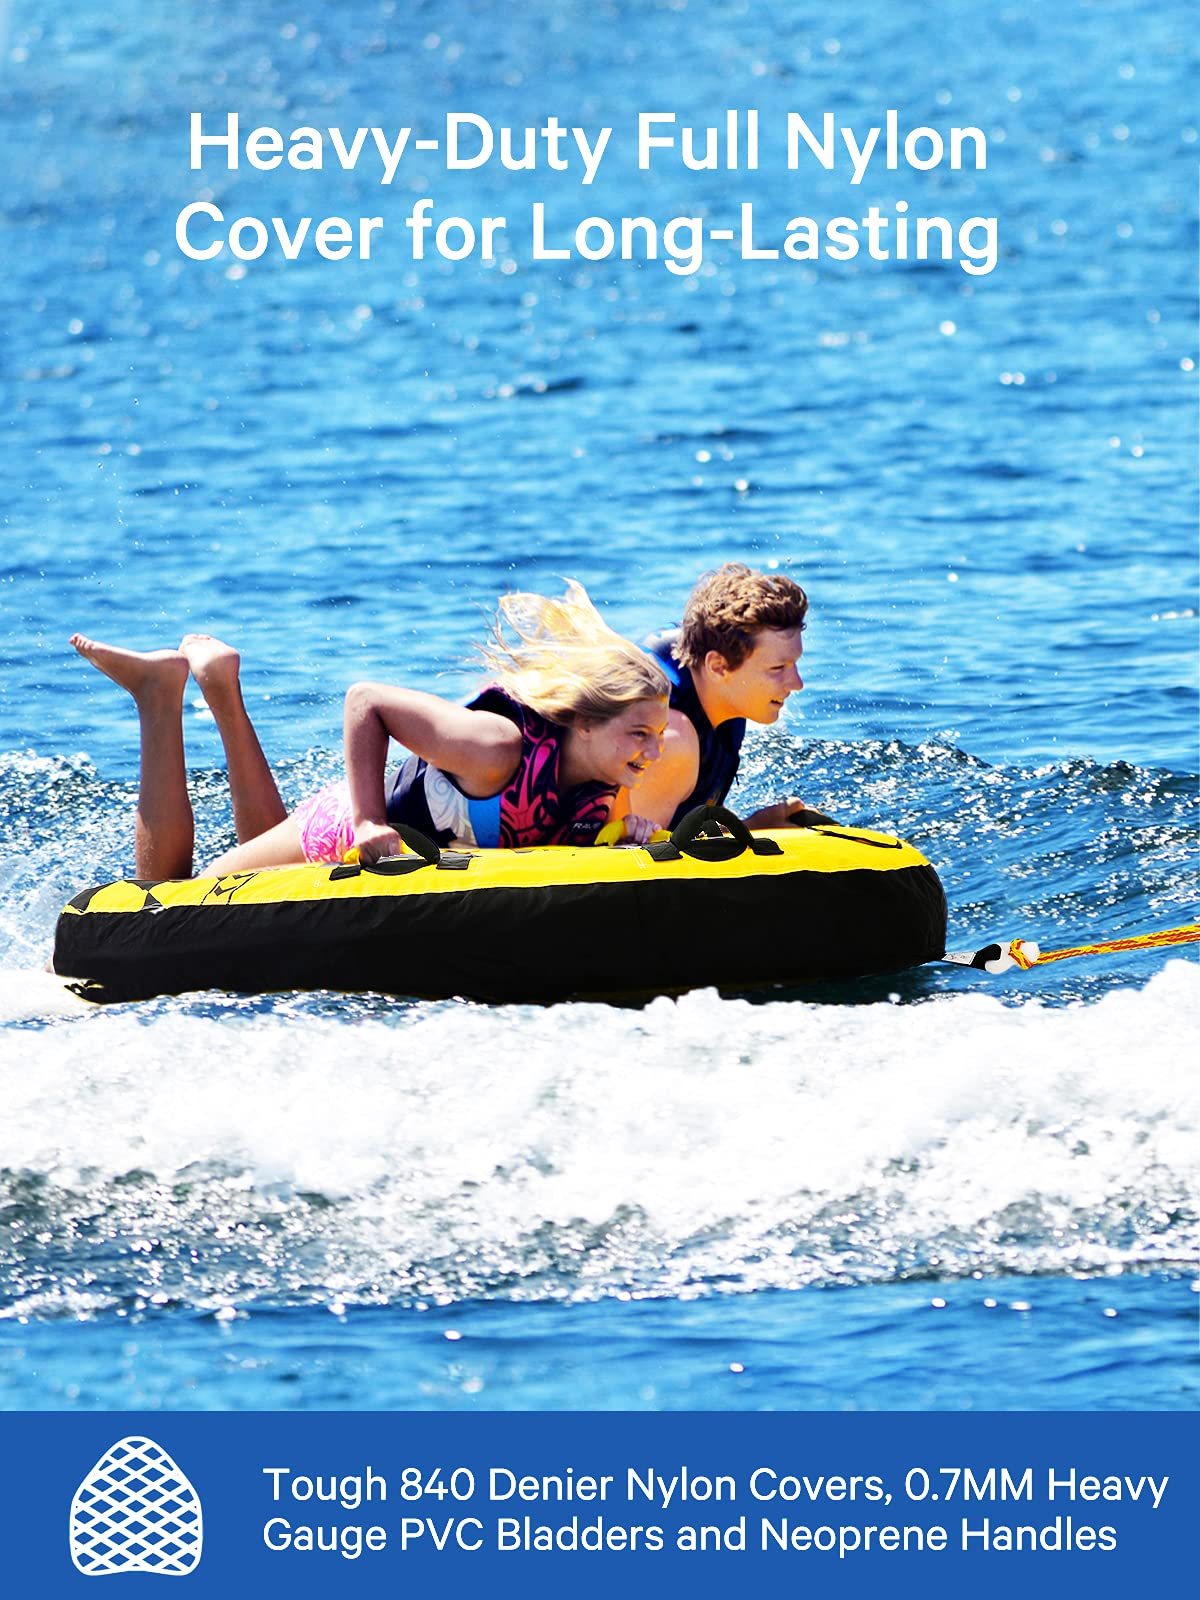 Load image into Gallery viewer, Maxkare Towable Tube for Boating 2 Riders Inflatable Towable Boat Tube for Women Men Kids, Yellow
